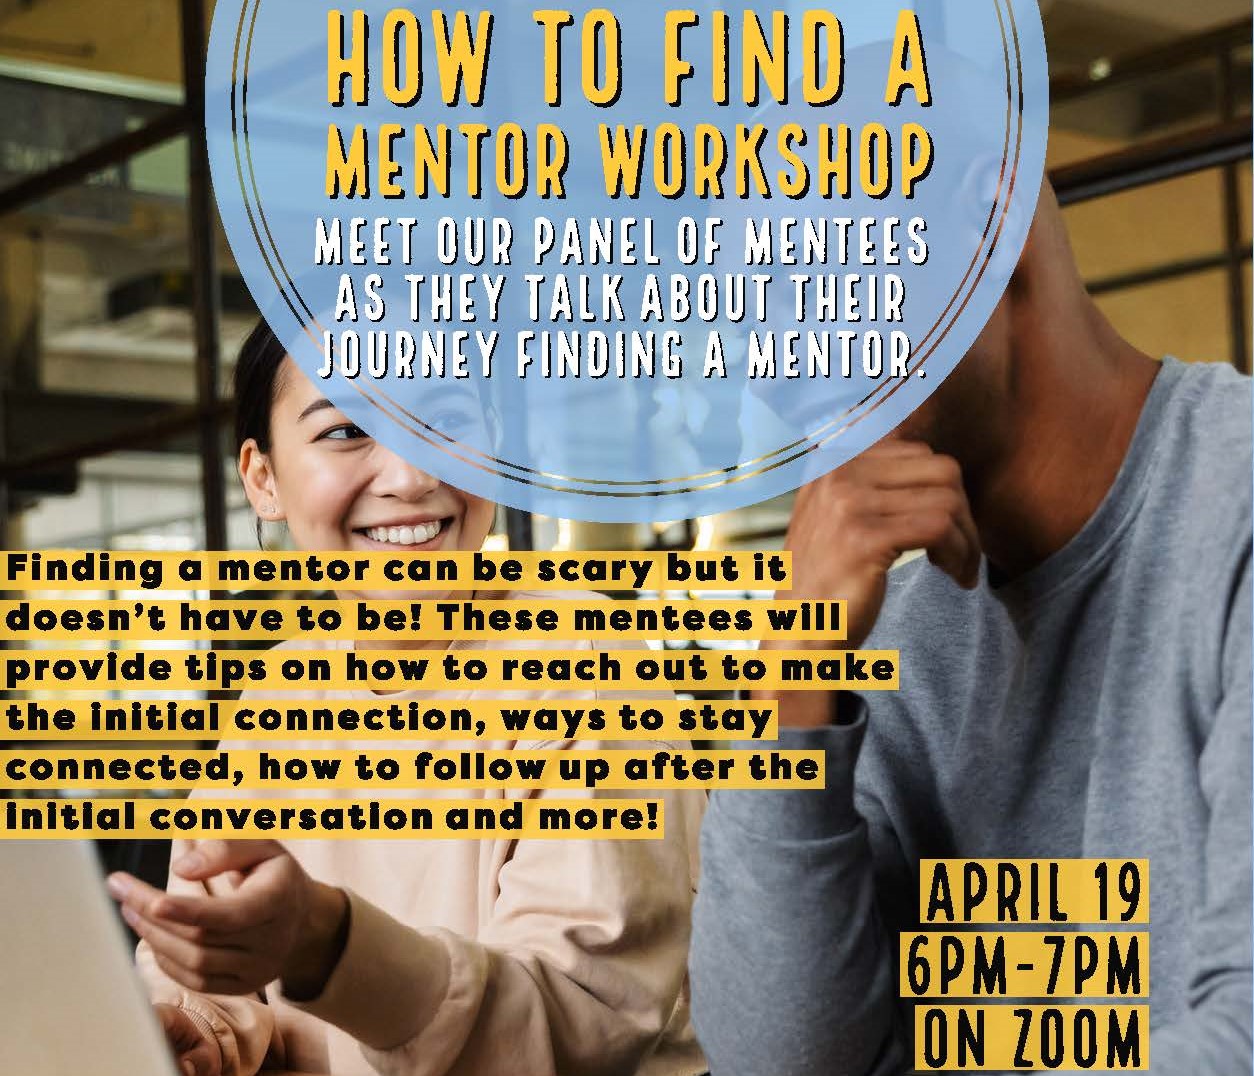 Two people looking at a laptop, Text for workshop, How to find a mentor on April 19 6-7pm on zoom